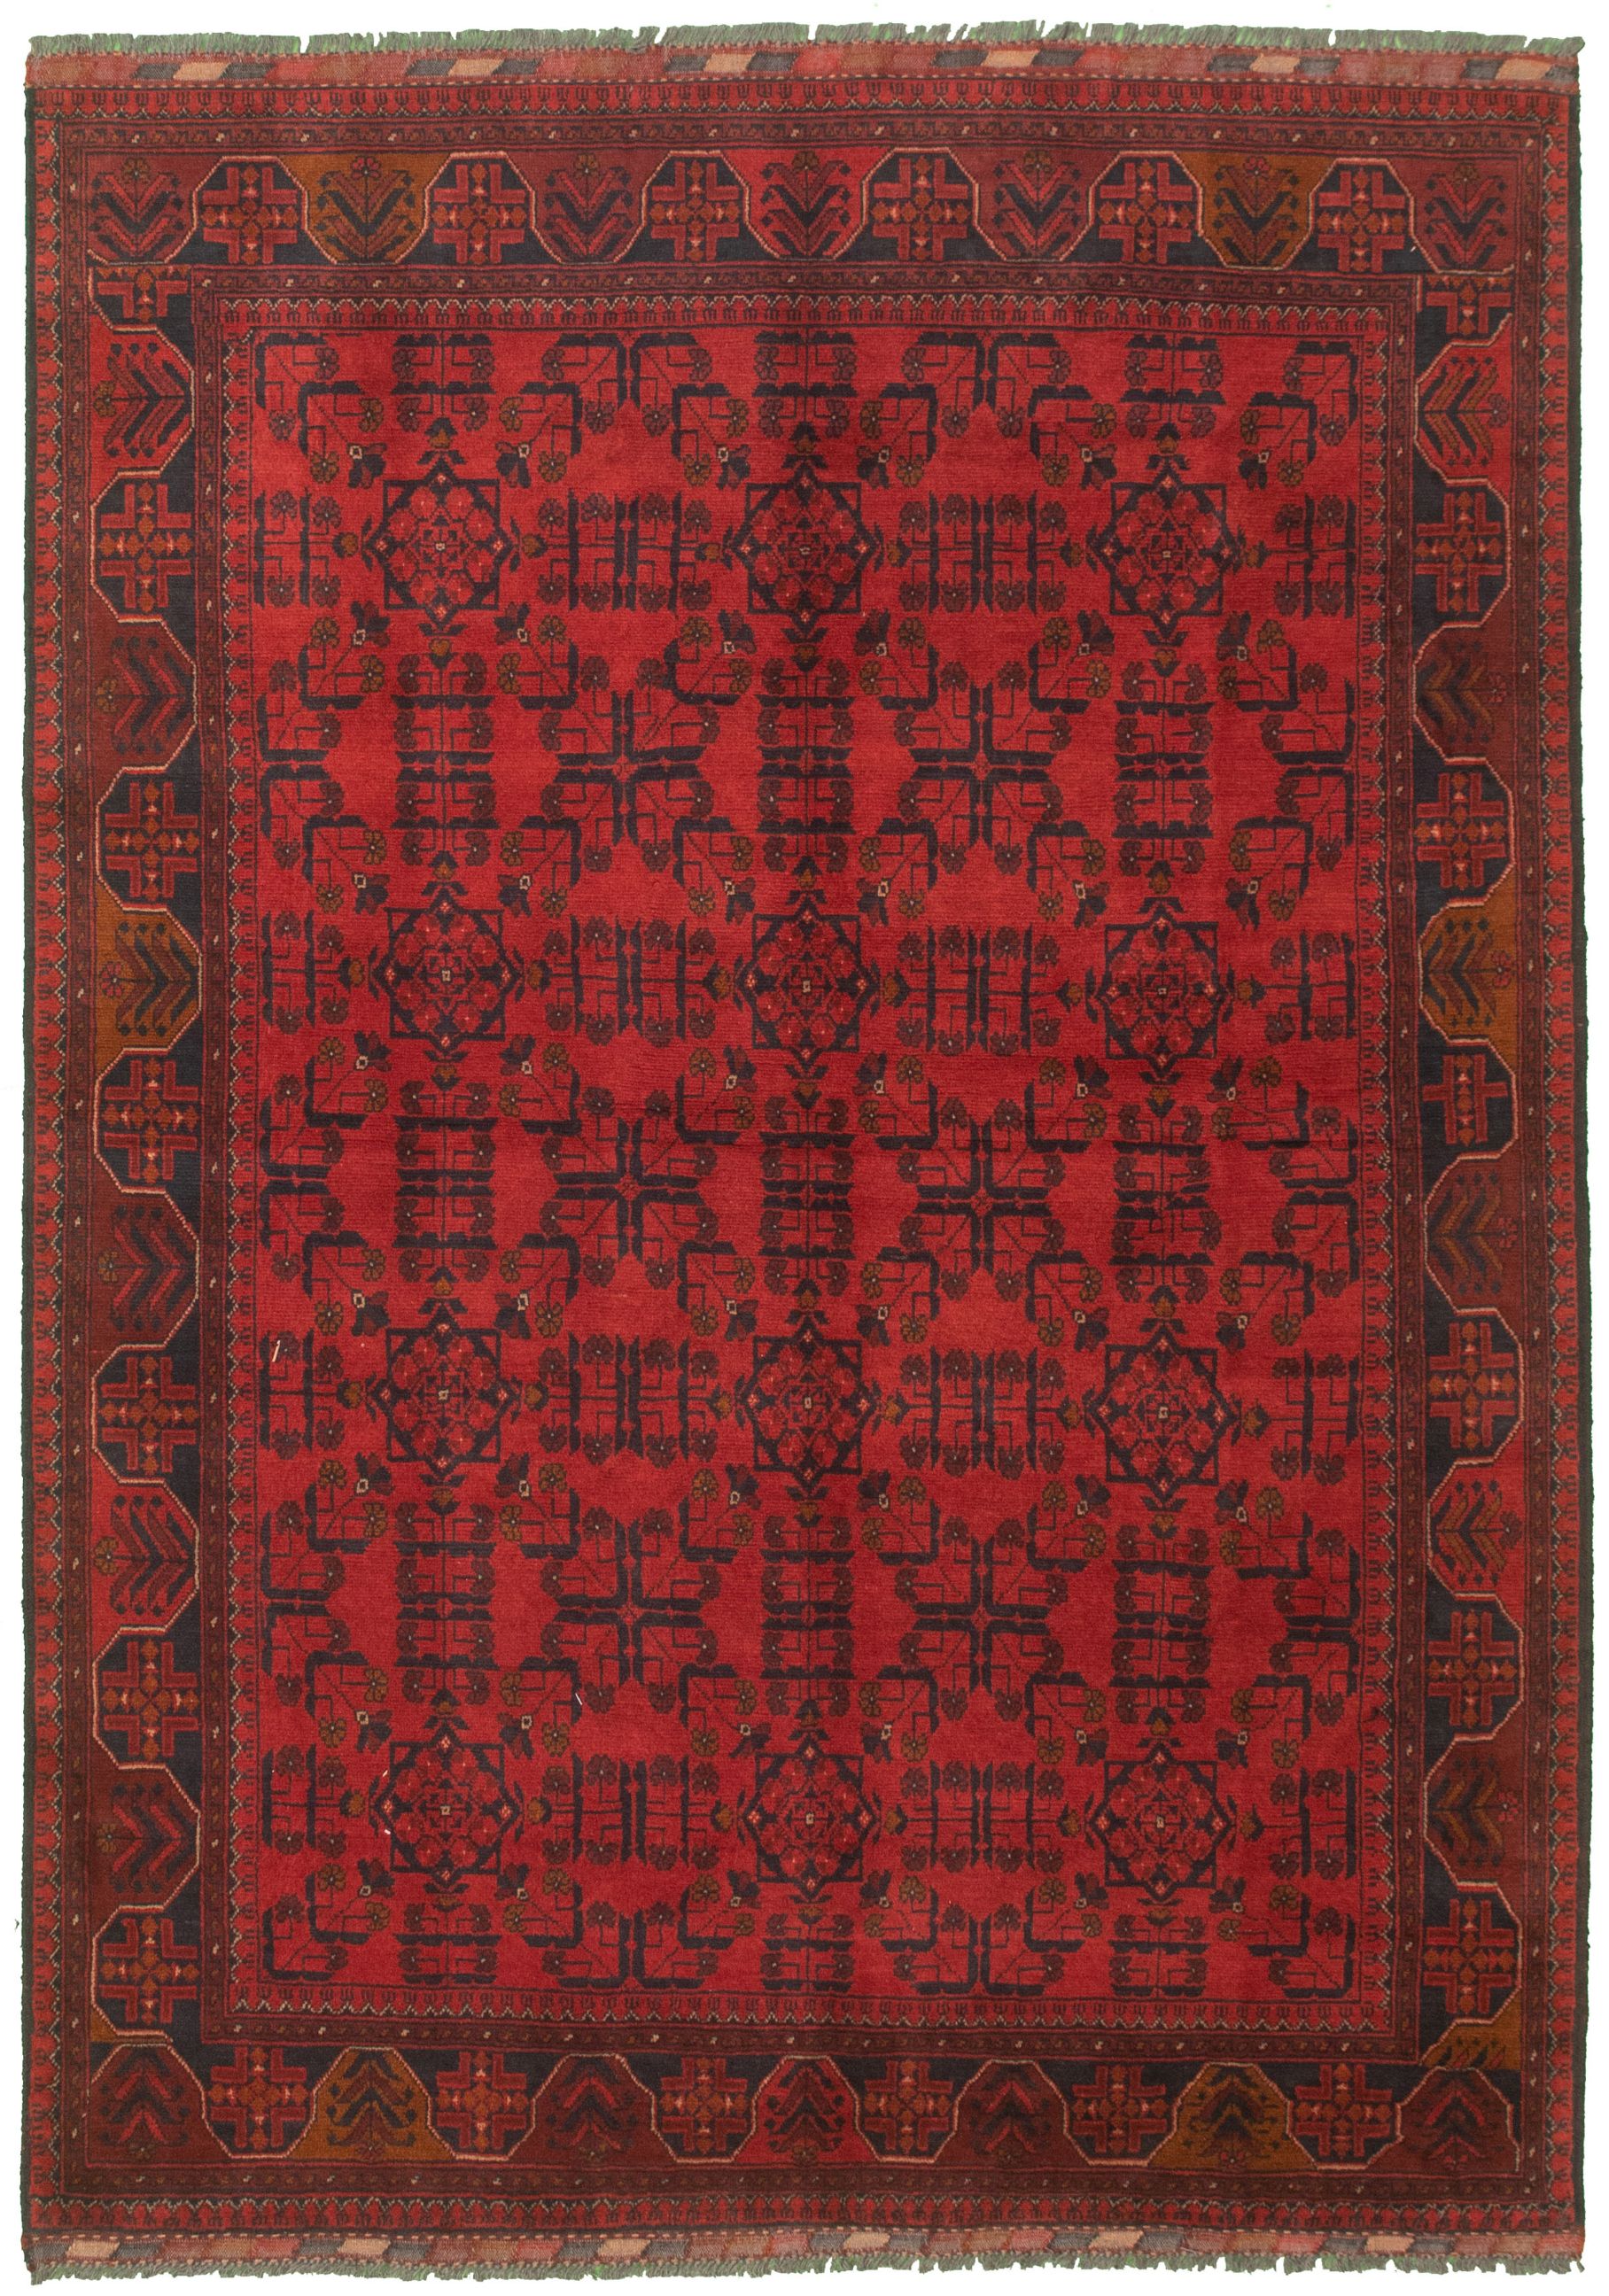 Hand-knotted Finest Khal Mohammadi Red Wool Rug 7'10" x 5'7" Size: 7'10" x 5'7"  